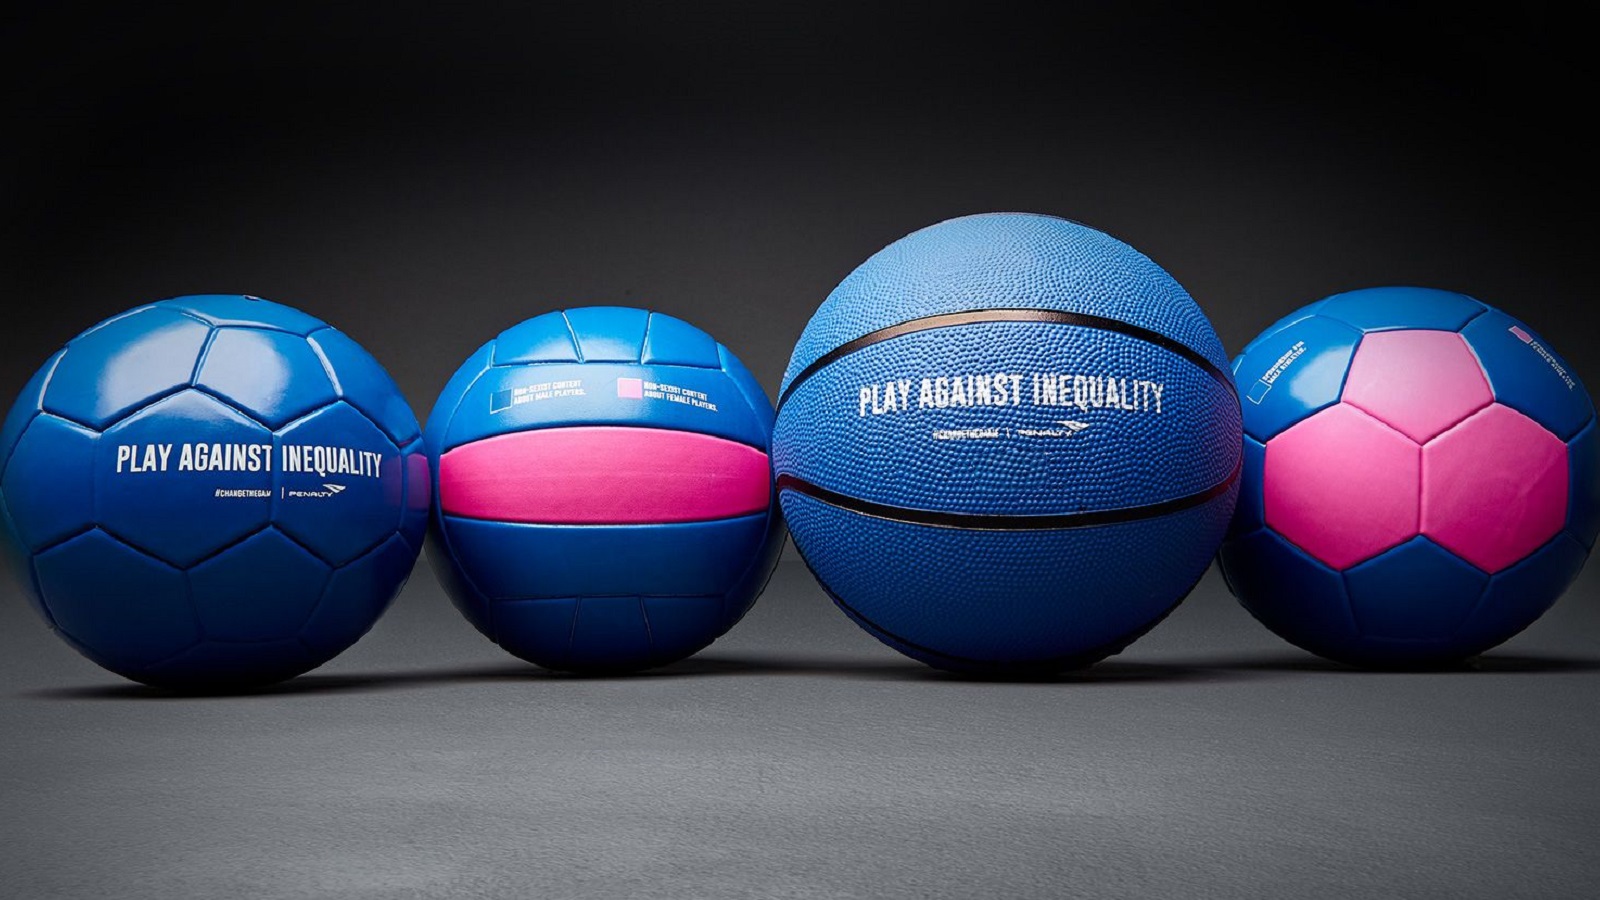 espnW Responds to the Gender Pay Gap with Inequality Balls